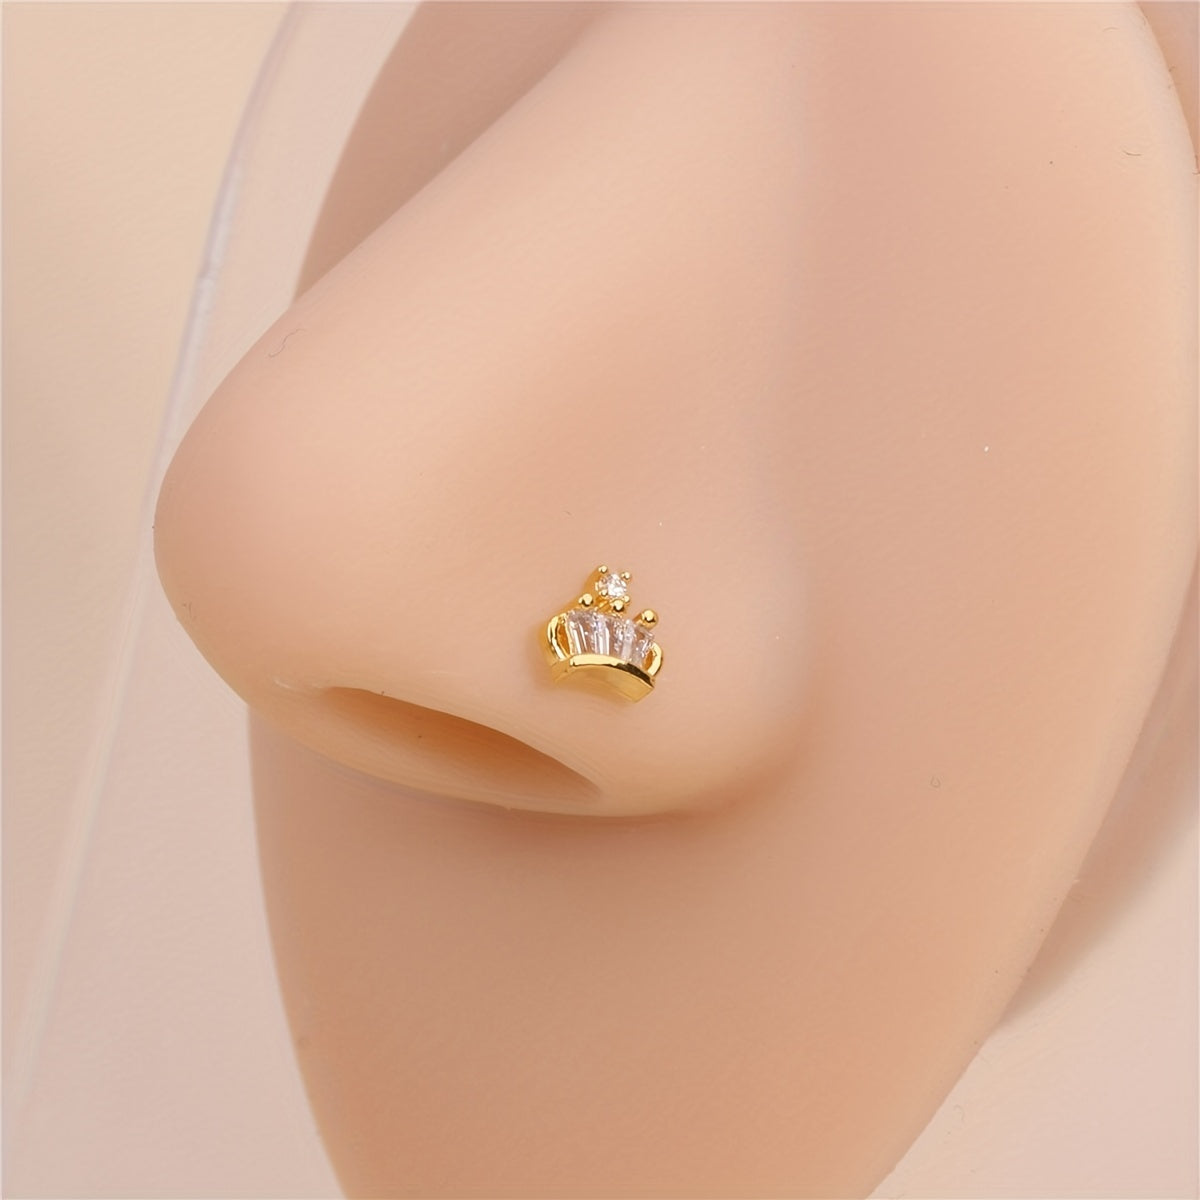 L Shape Nose Ring Studs For Women Body Piercing Jewelry